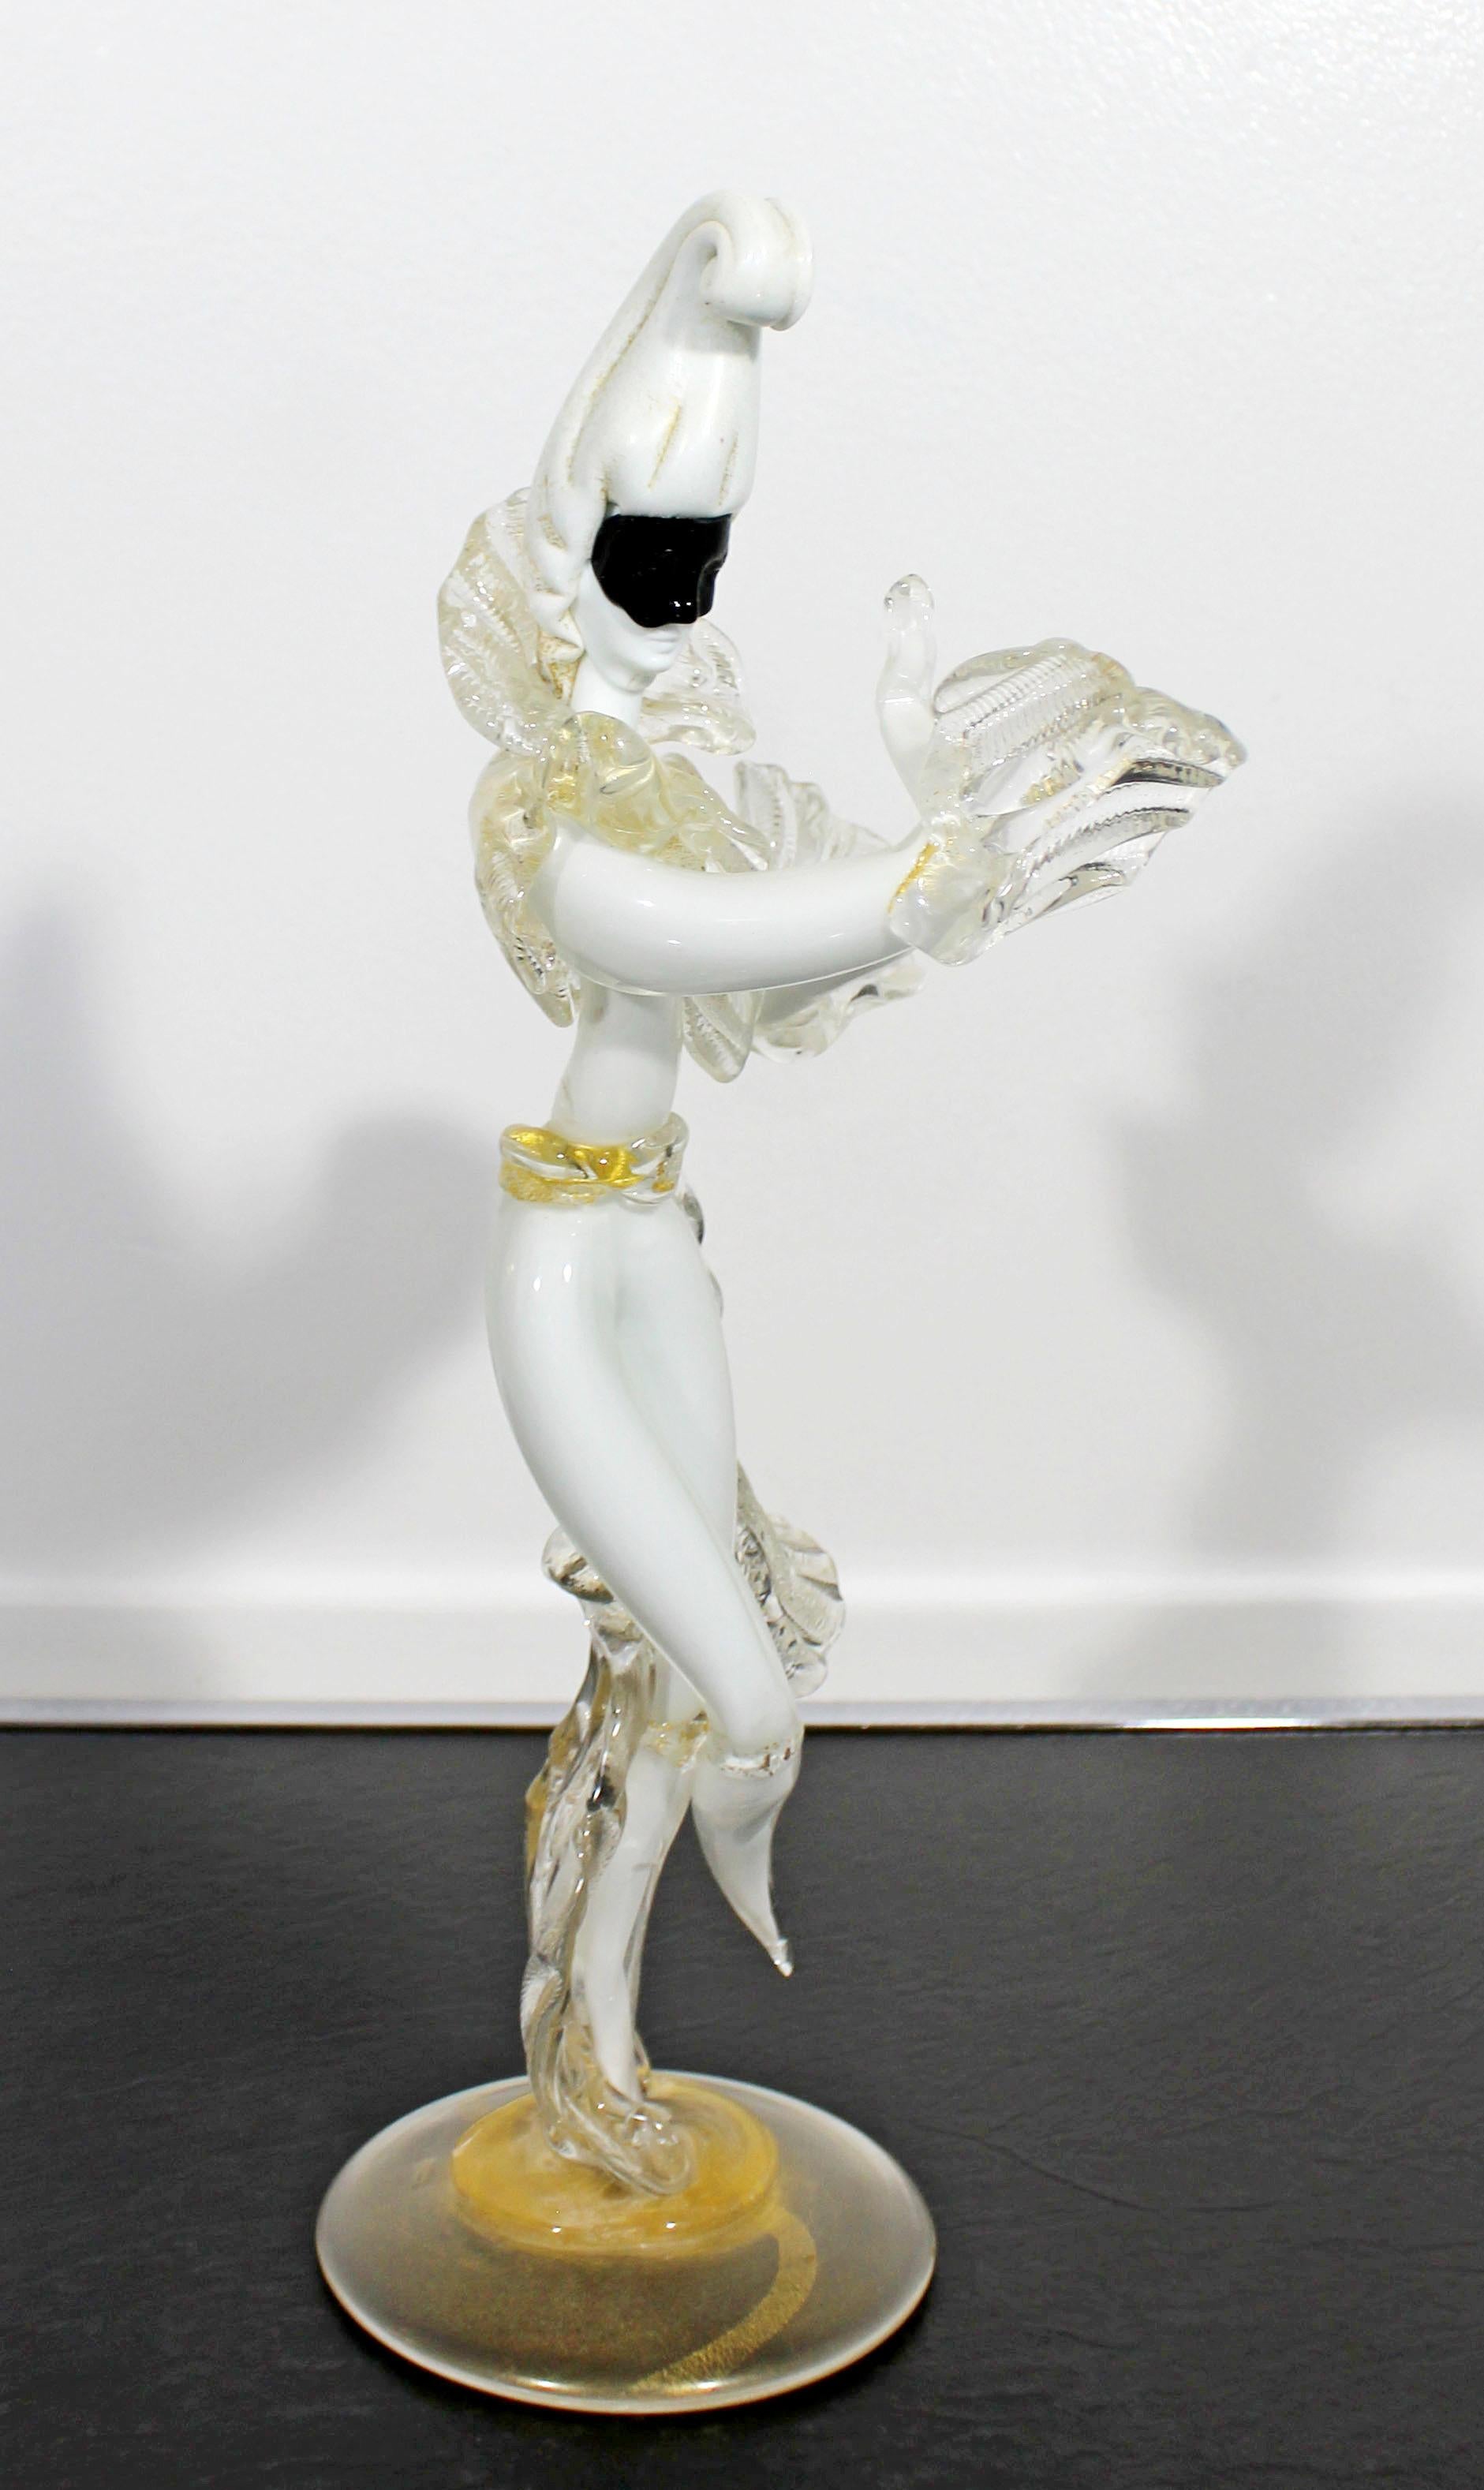 For your consideration is an incredible, white and gold flecked Murano glass gentleman table sculpture, in the style of Barovier Toso and Seguso, circa 1960s. In excellent condition. The dimensions are 6